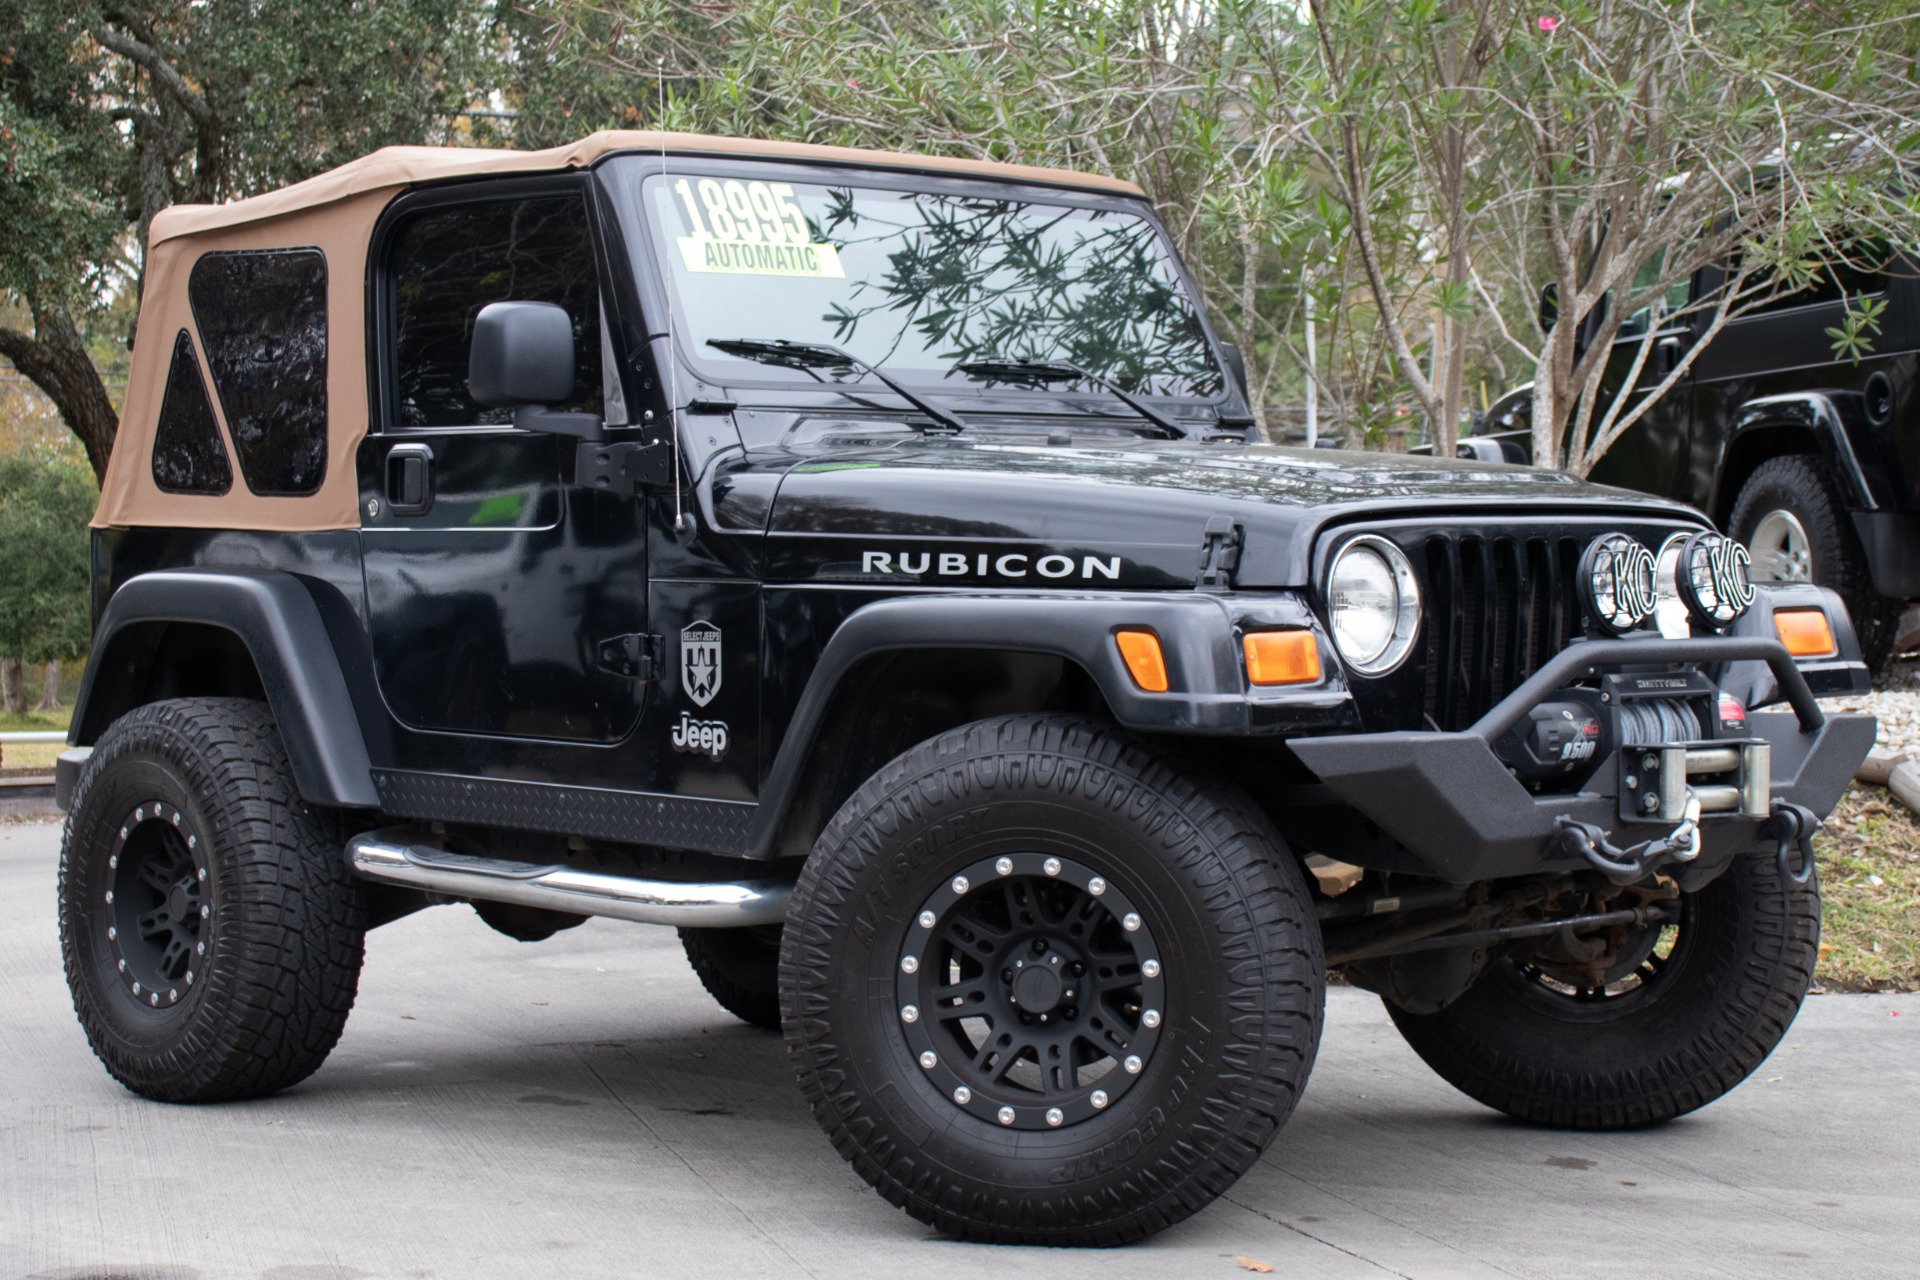 Used 2006 Jeep Wrangler Rubicon For Sale ($18,995) | Select Jeeps Inc ...